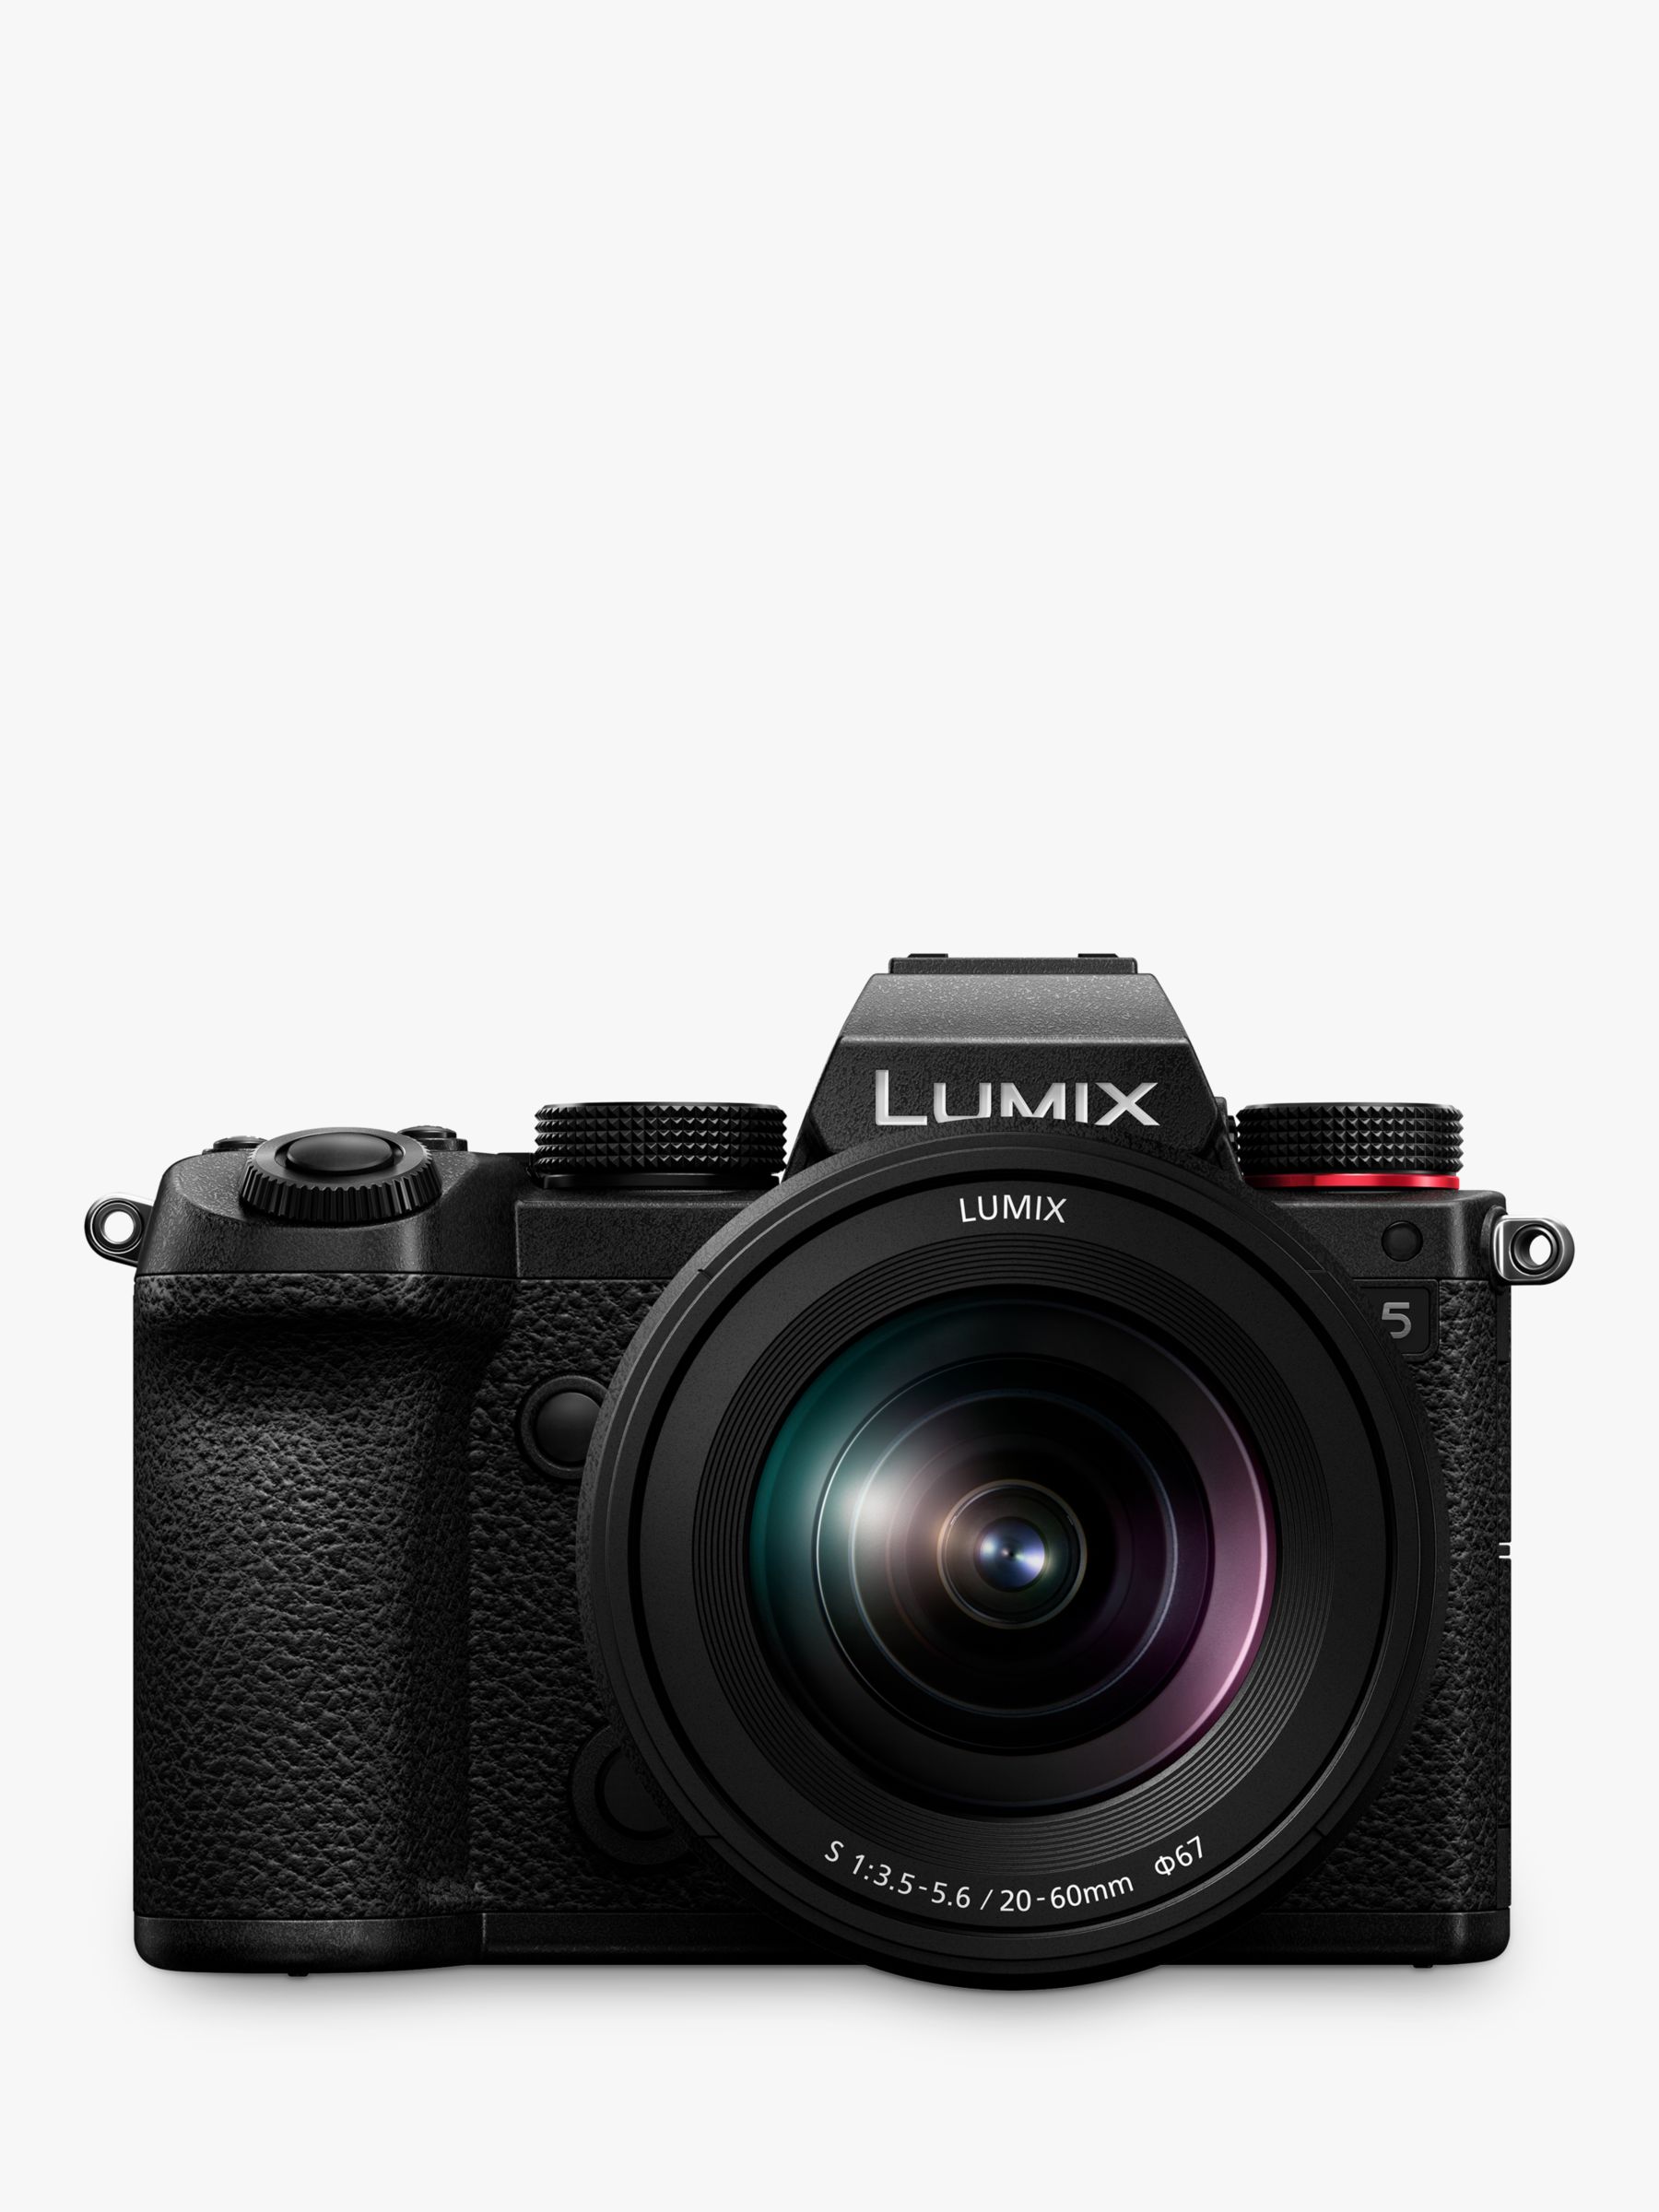 Image of Panasonic Lumix DCS5 Compact System Camera with 2060mm Lens 4K Ultra HD 242MP WiFi Bluetooth Live Viewfinder 3 VariAngle Touch Screen Black